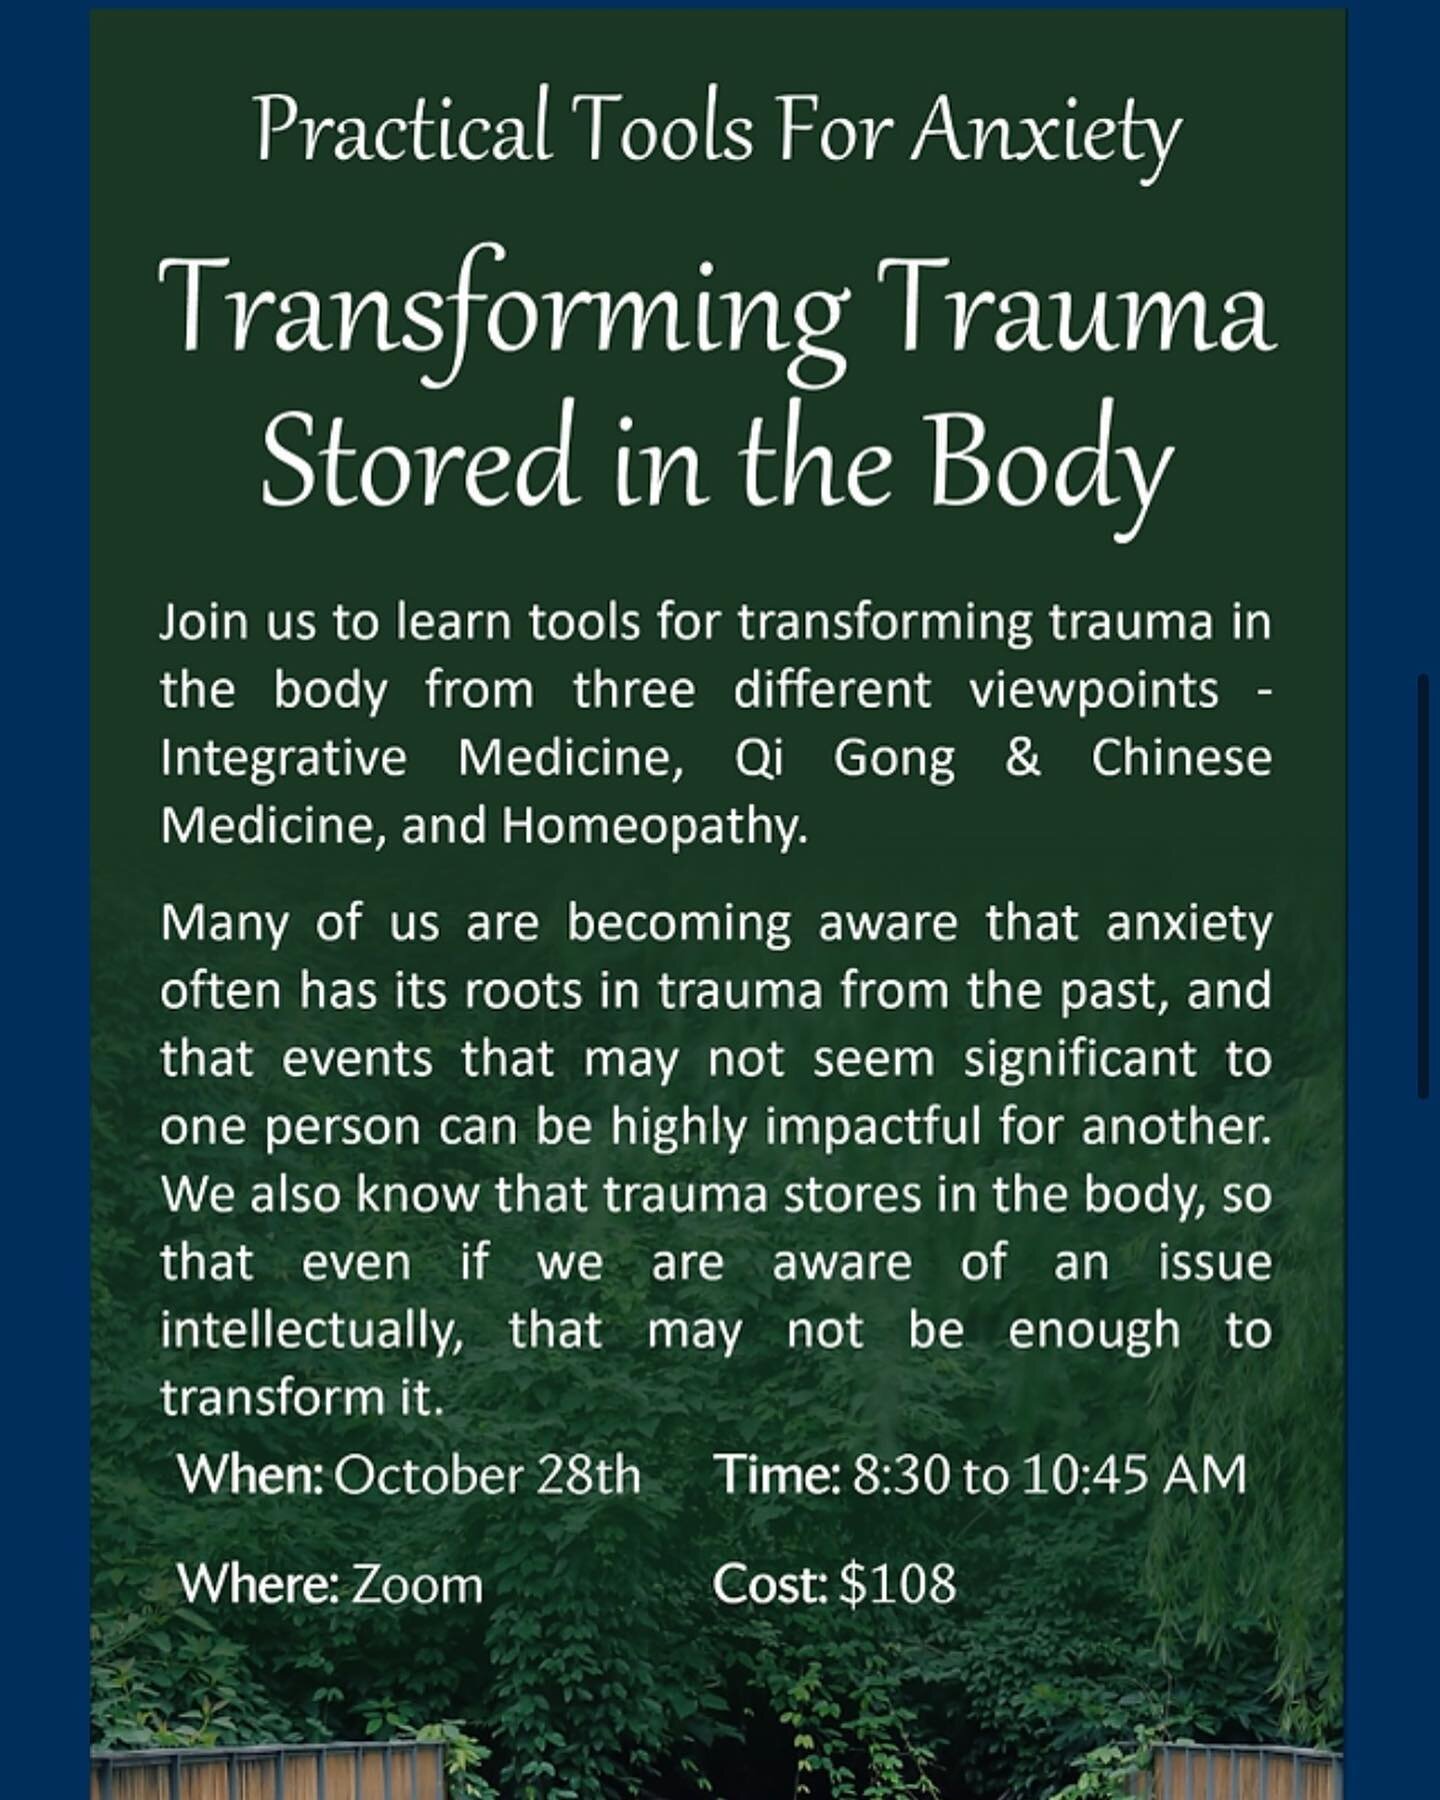 As Gabor Mate would say in his book The Myth of Normal, experiencing trauma in one&rsquo;s life is part of the human experience. However, our capacity to process and integrate that trauma is what sets us up for freedom from ailments that stem from tr